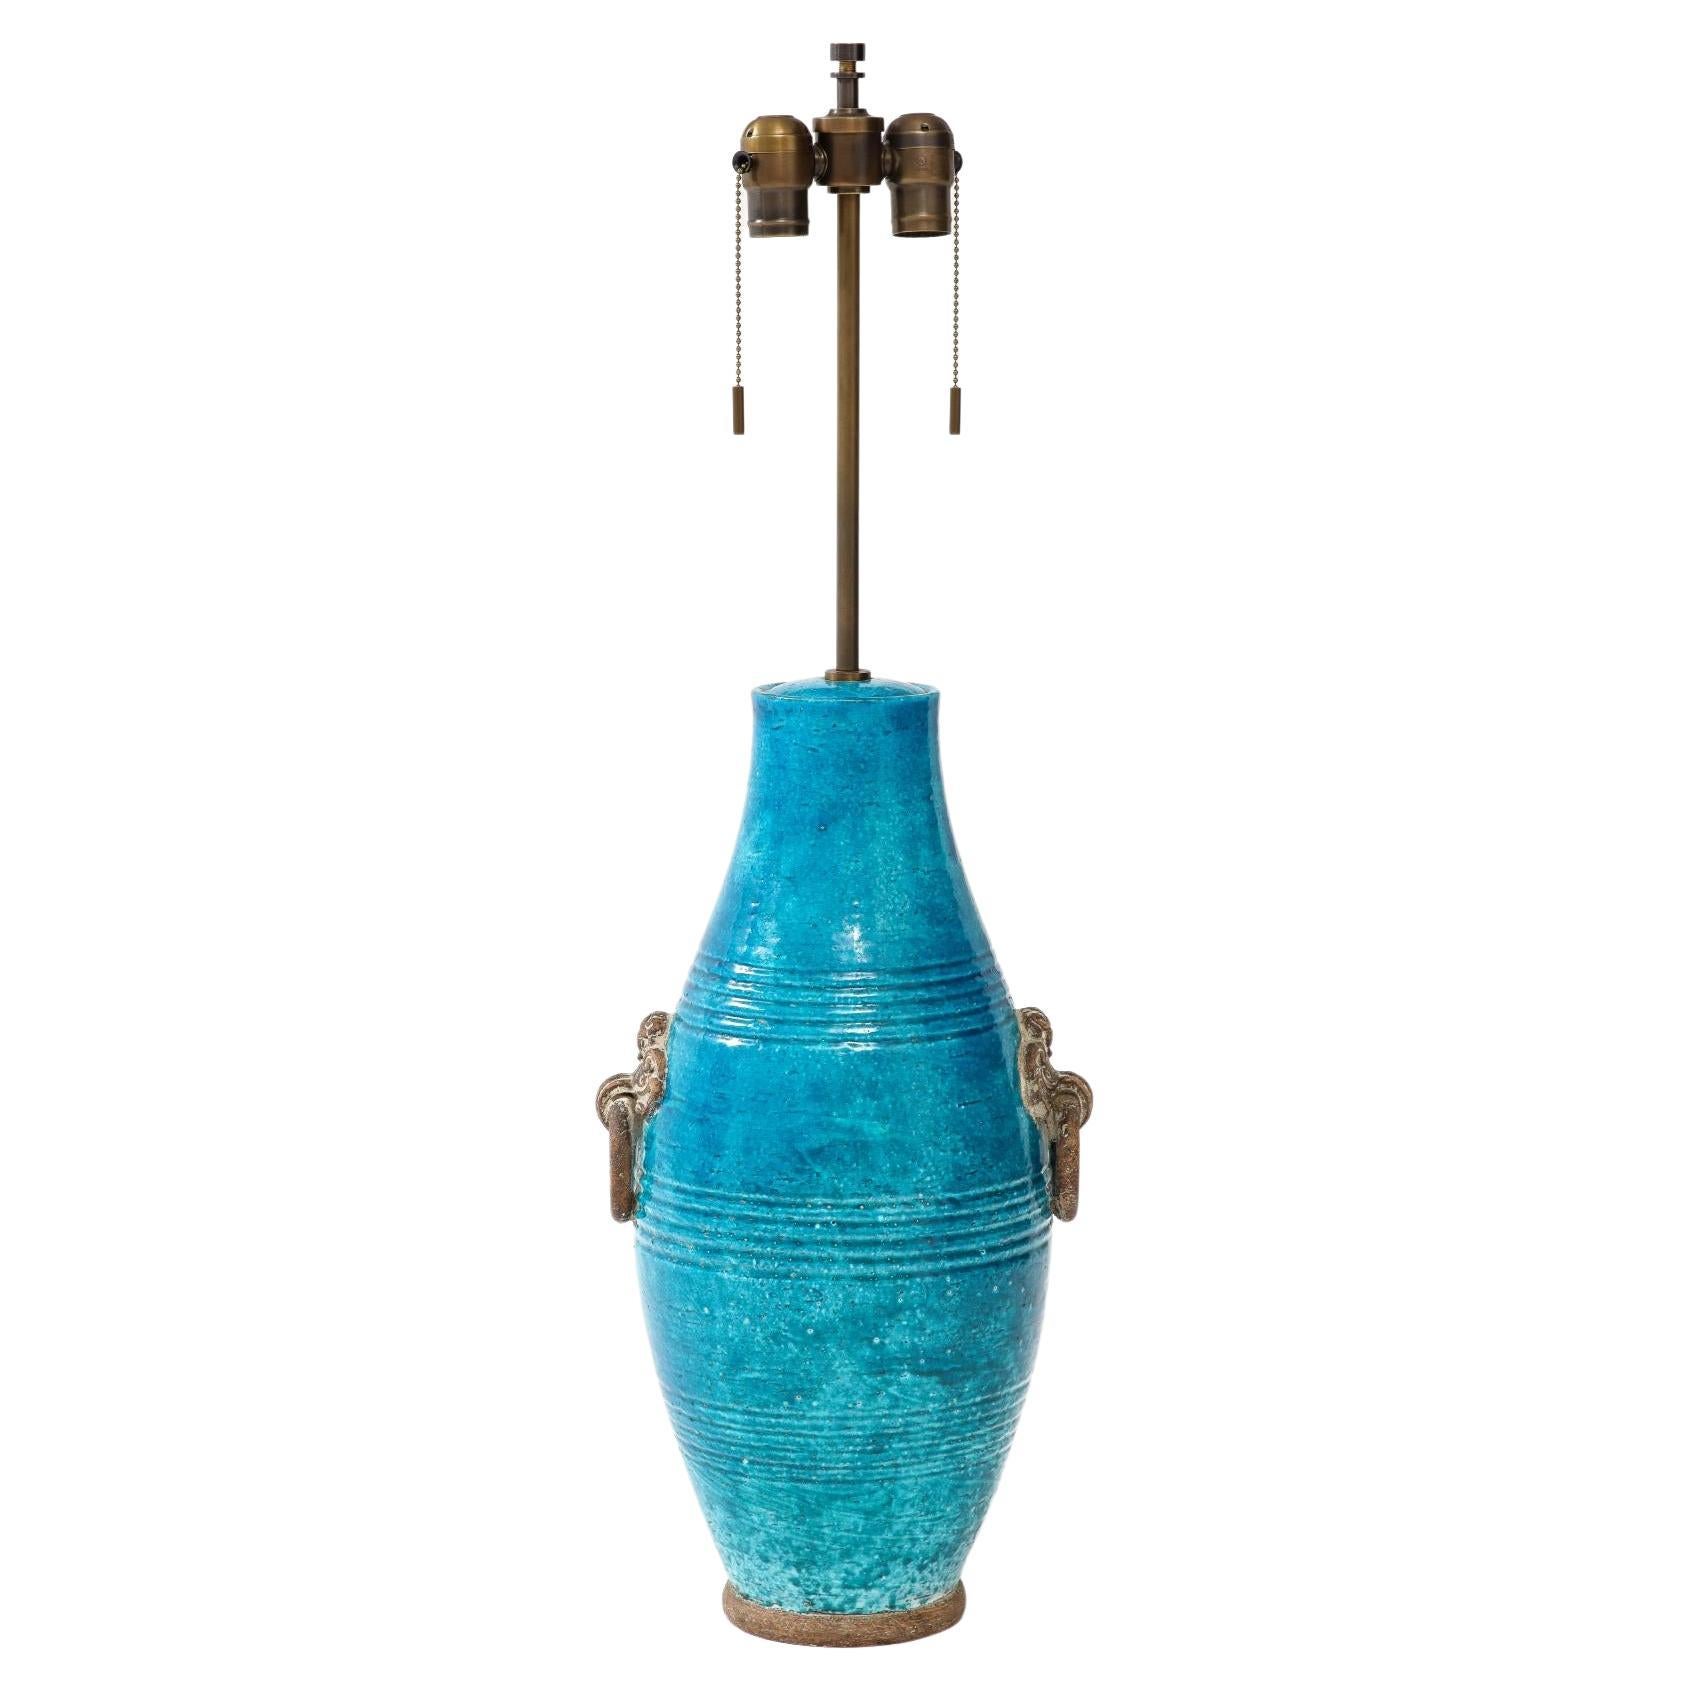 Brass and Glazed Stoneware Monumental Table Lamp by Ugo Zaccagnini, c. 1950